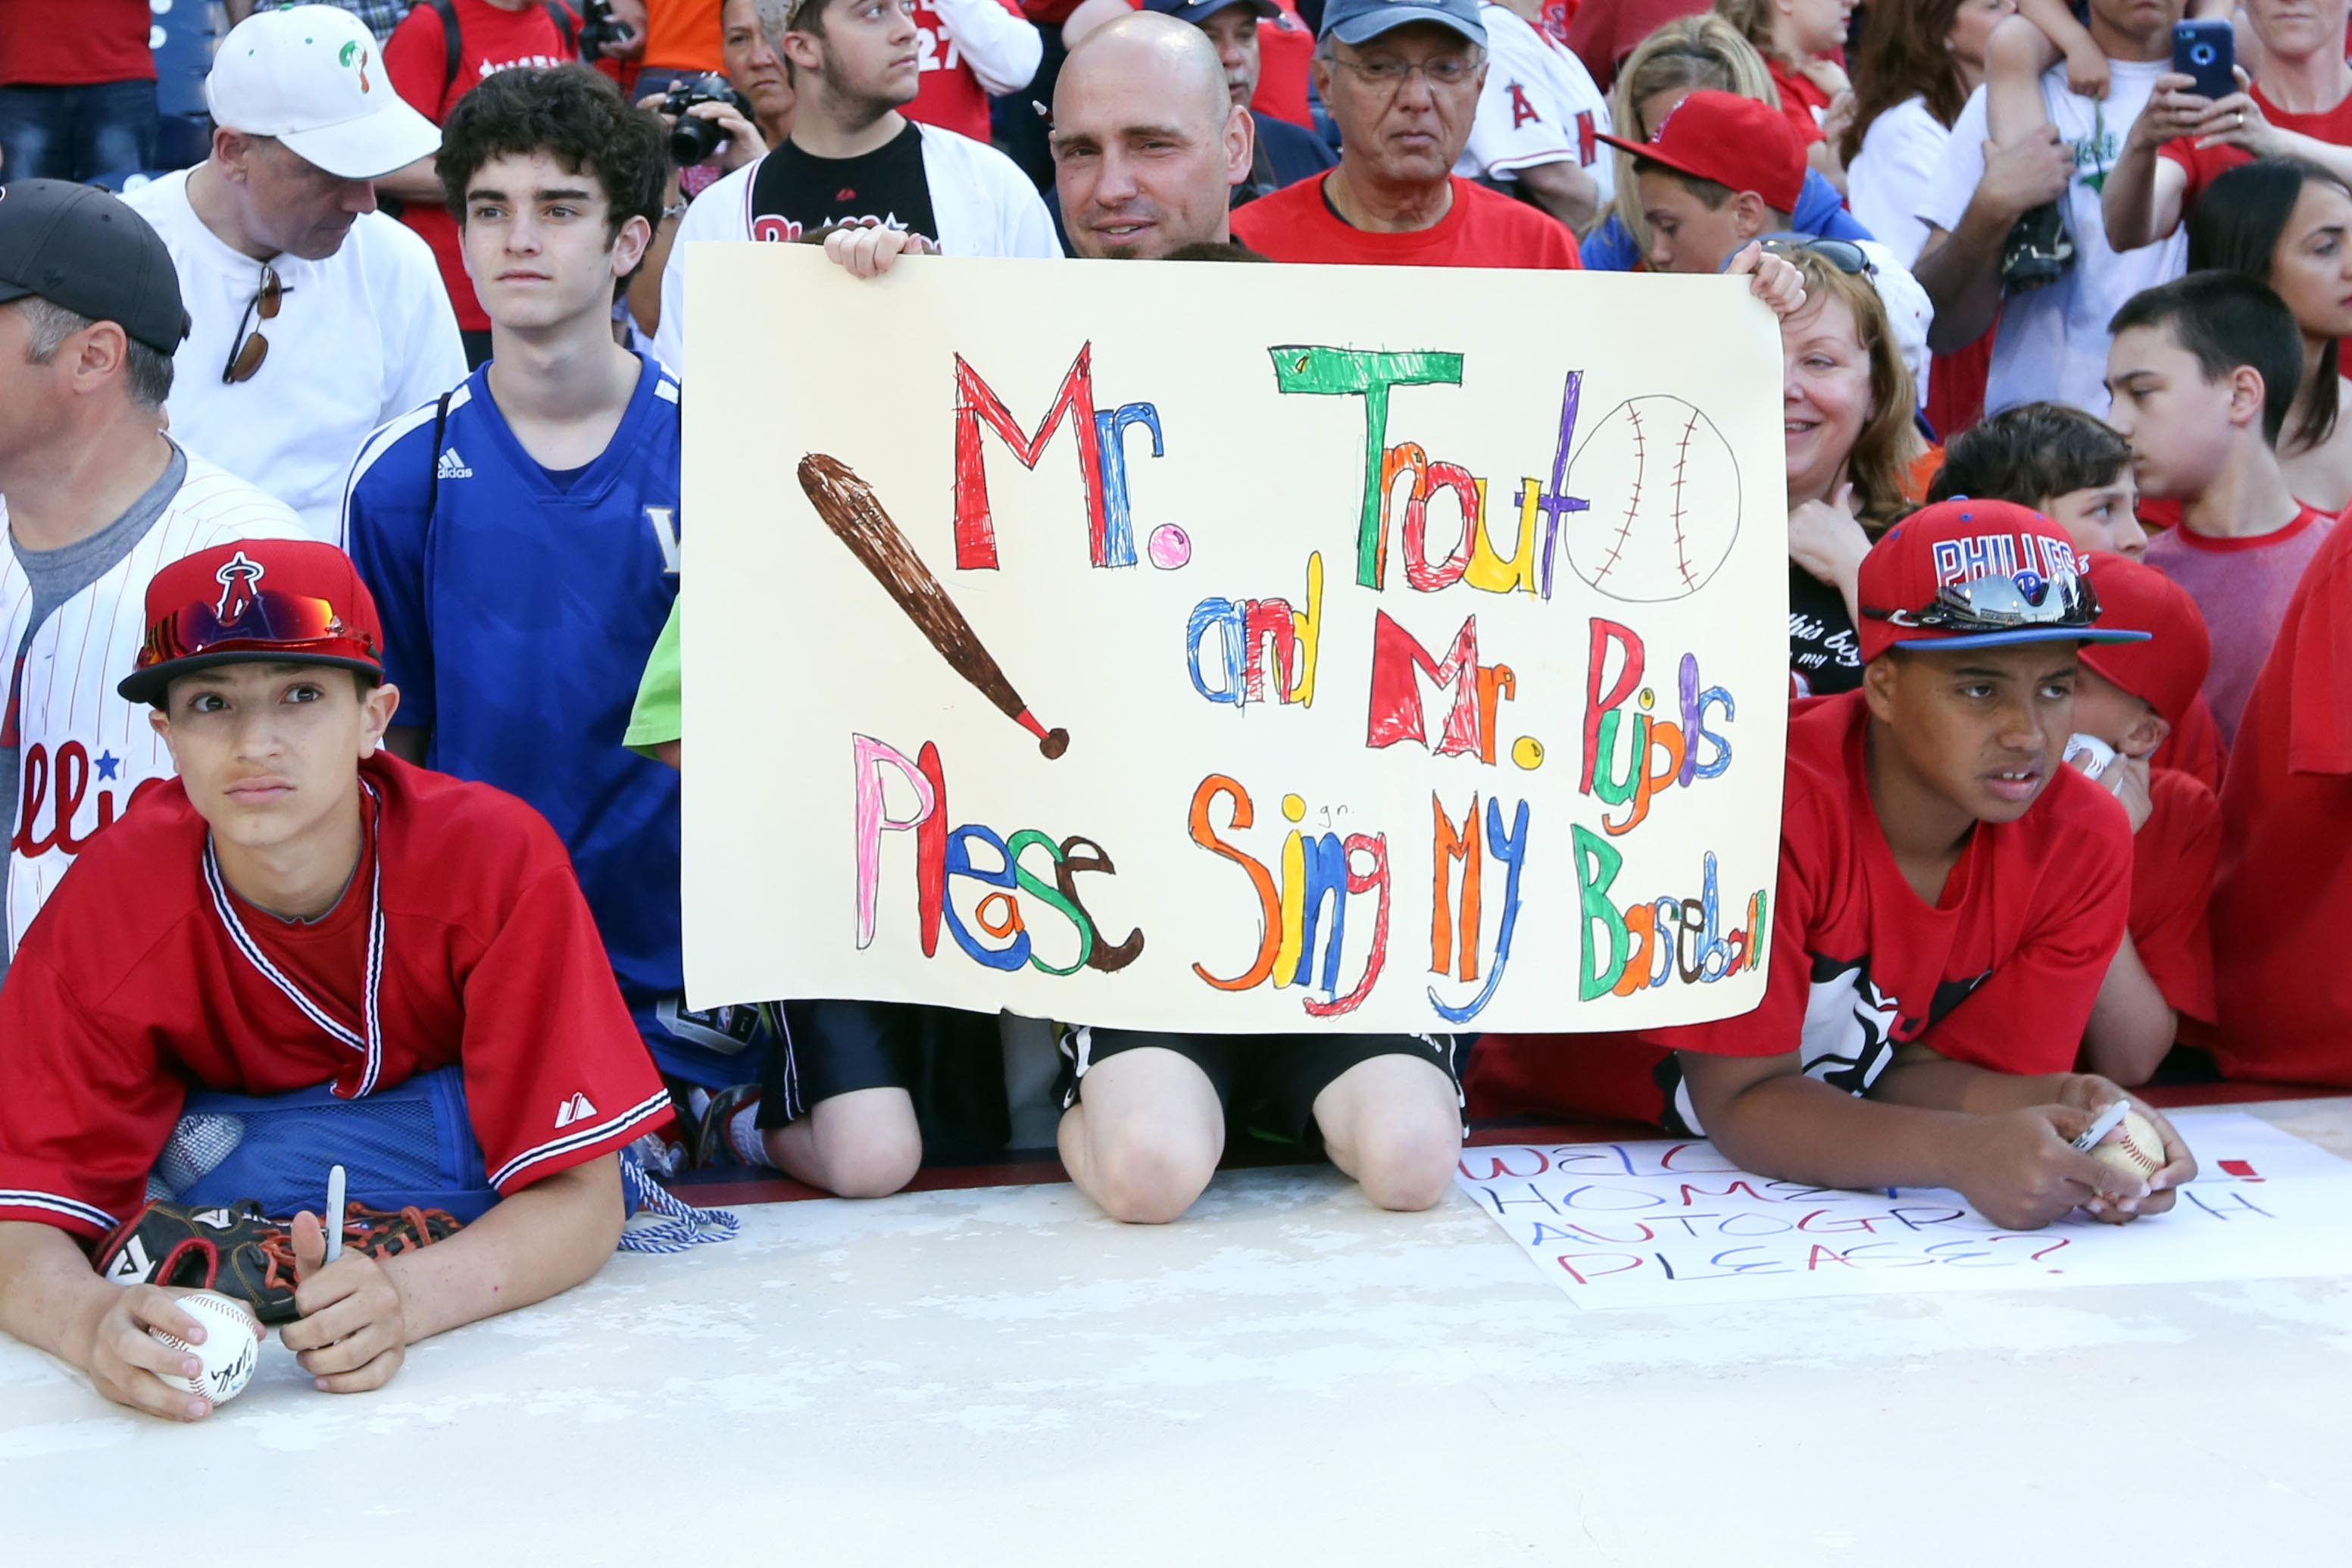 More than a number': Mike Trout's hometown tradition continues to